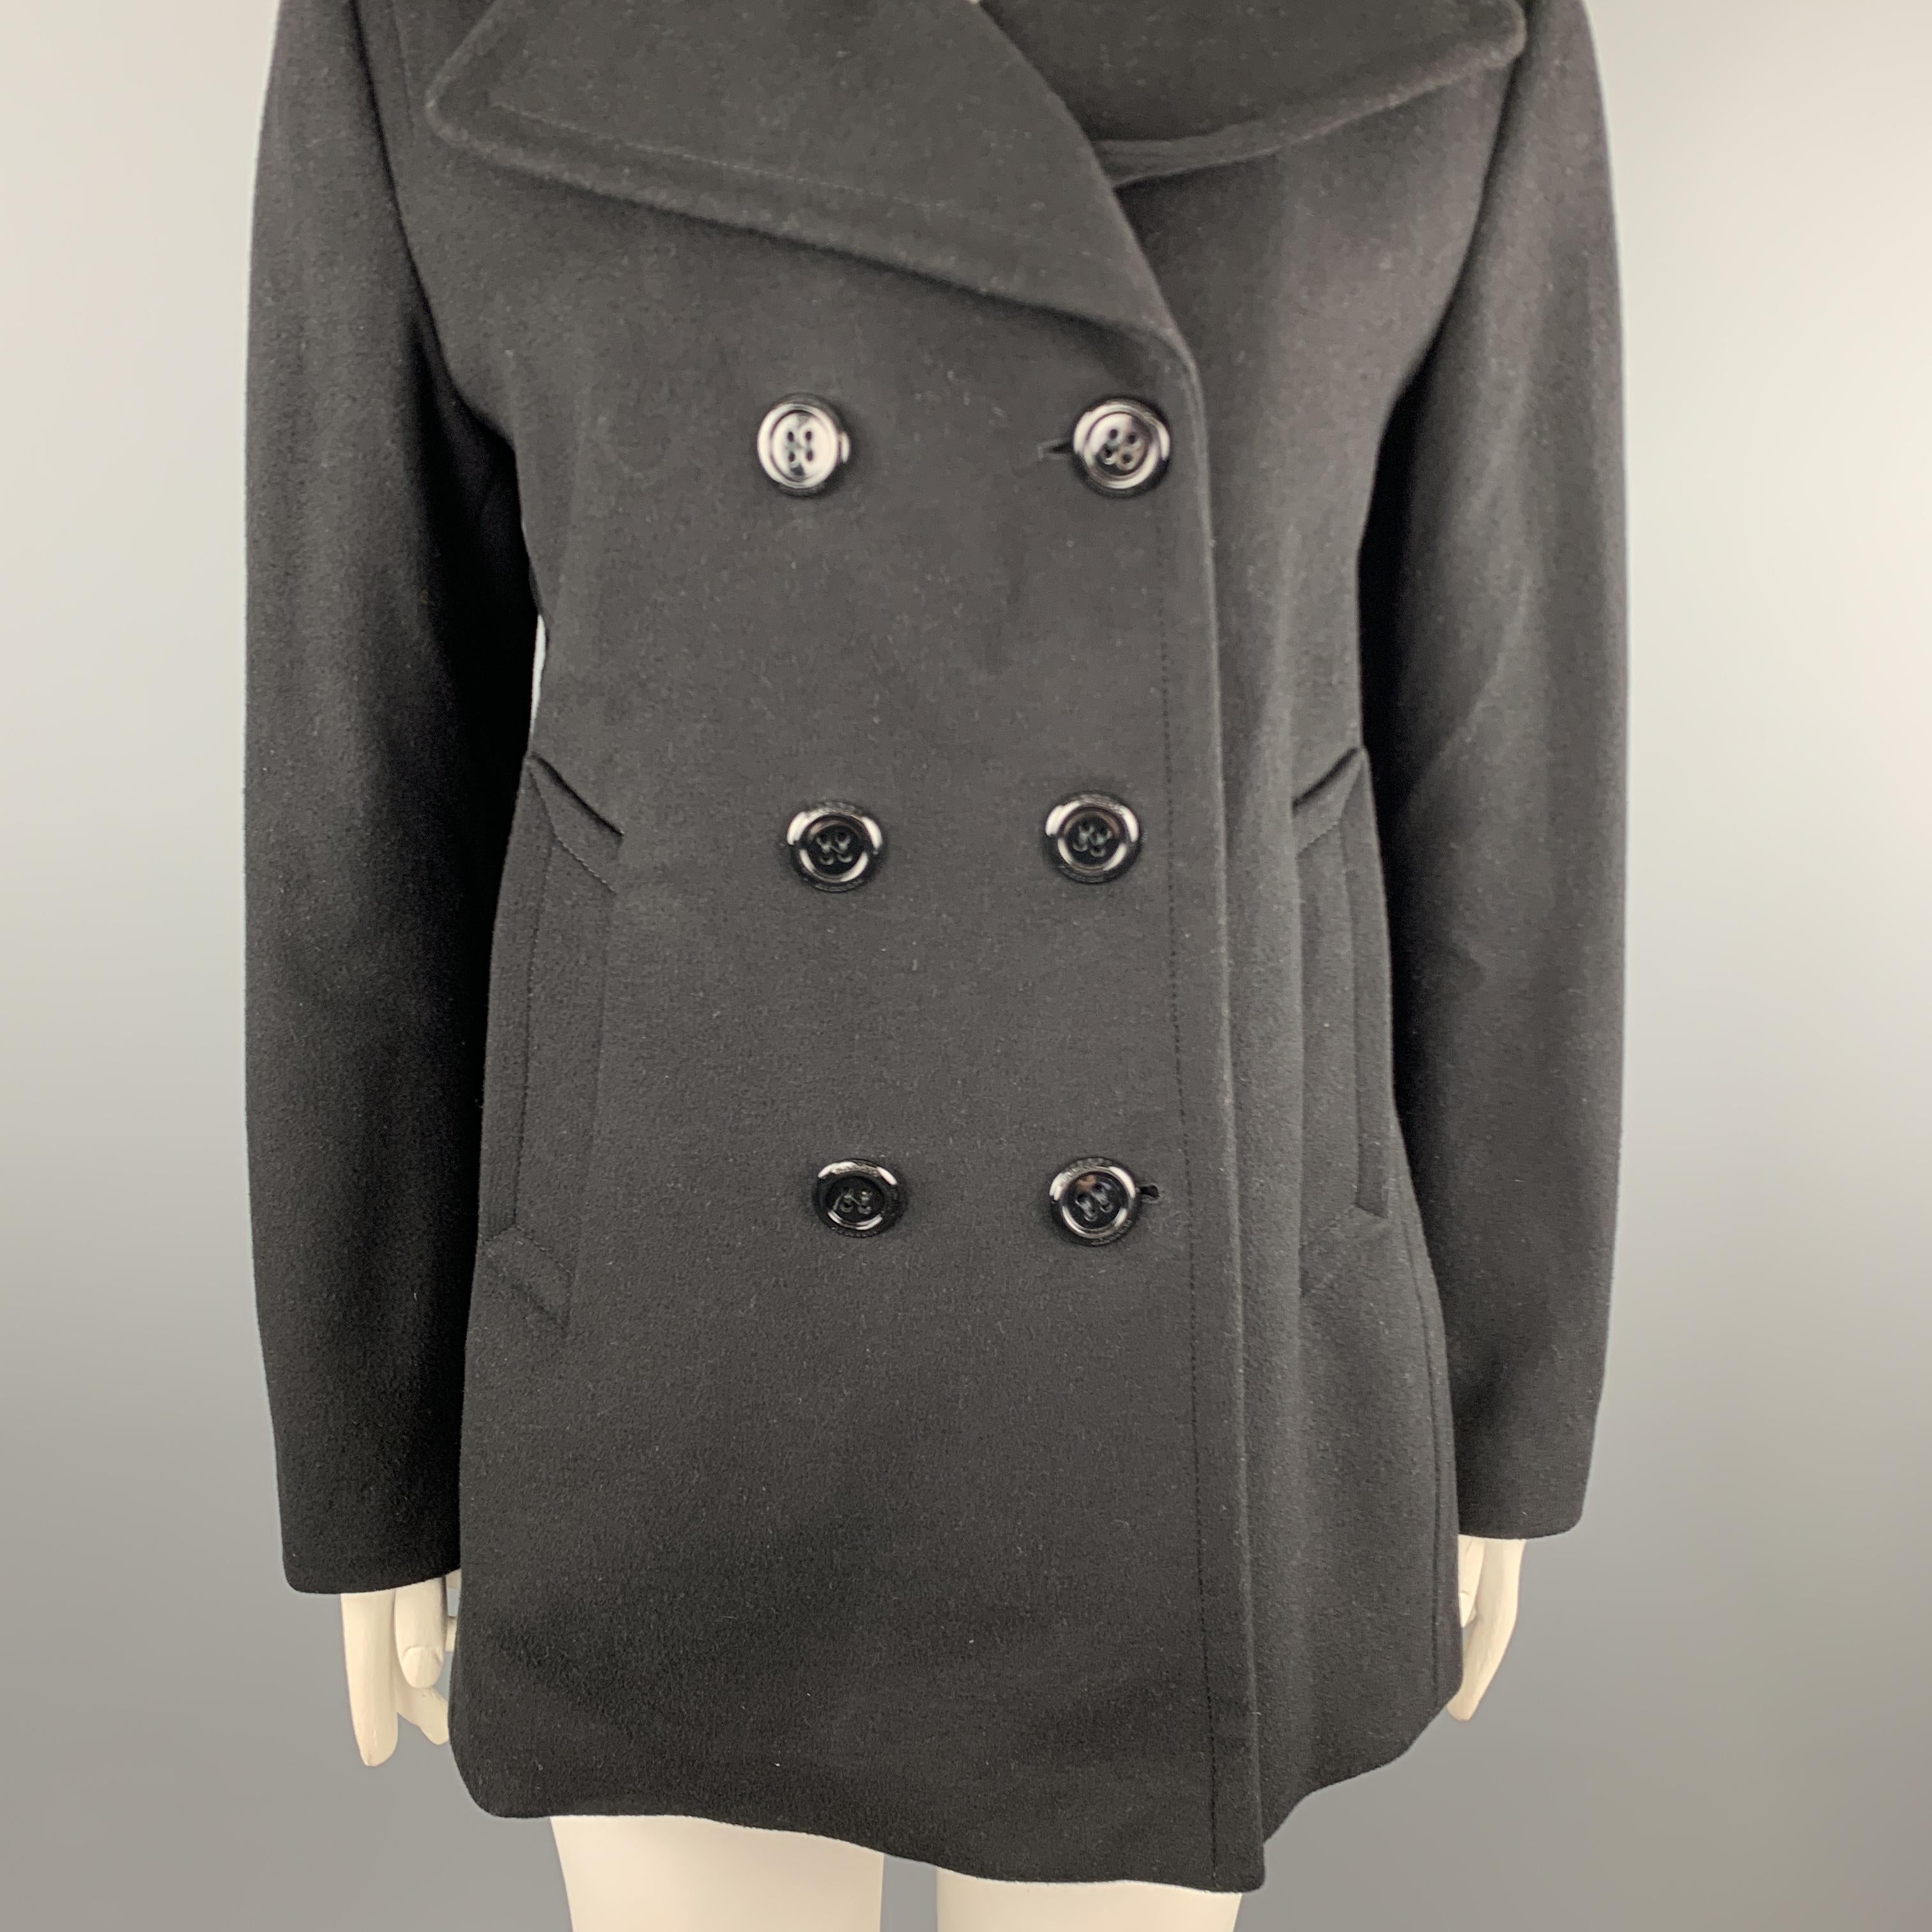 BURBERRY LONDON classic peacoat comes in black cashmere wool blend fabric with a double breasted button front and slit pockets. 

Excellent Pre-Owned Condition.
Marked: L

Measurements:

Shoulder: 18 in.
Bust: 46 in.
Sleeve:24 in.
Length: 29 in.